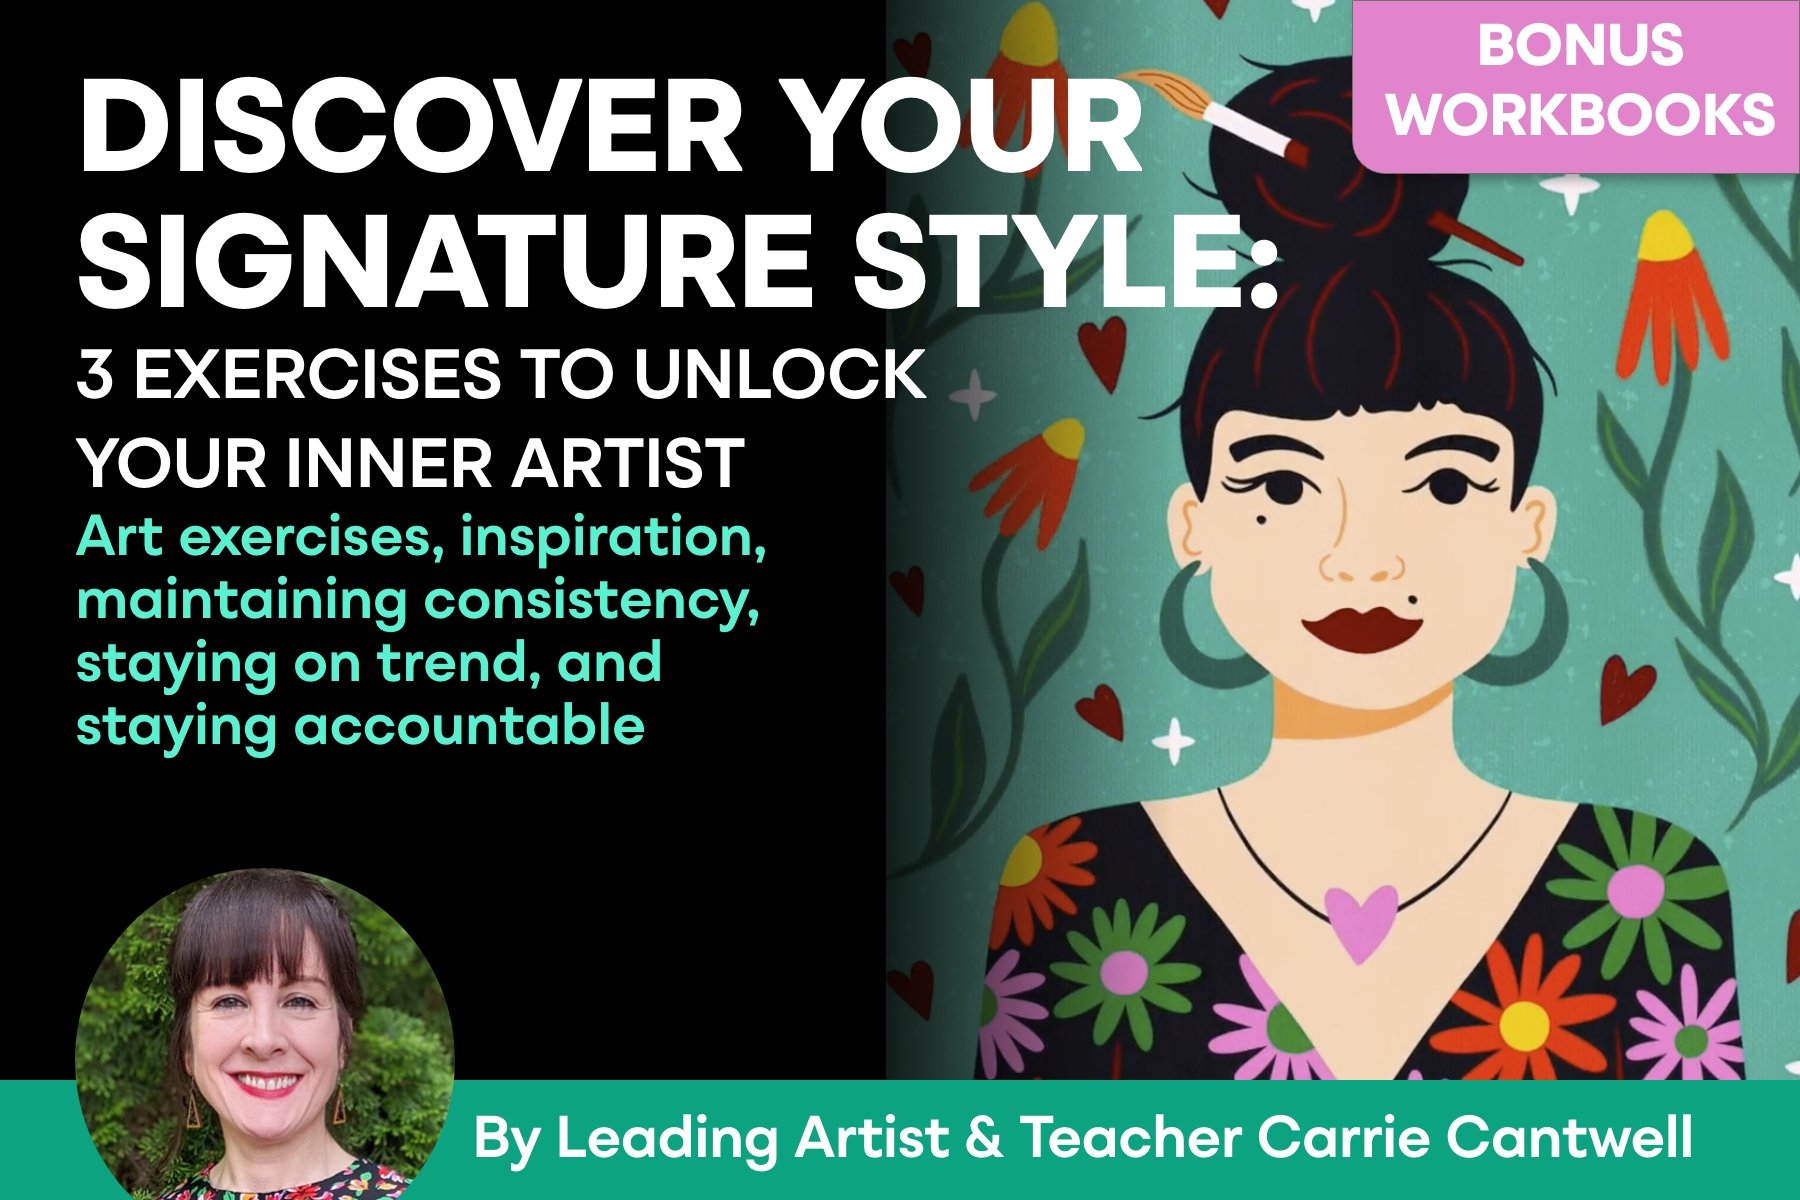 Discover Your Signature Style: 3 Exercises To Unlock Your Inner Artist